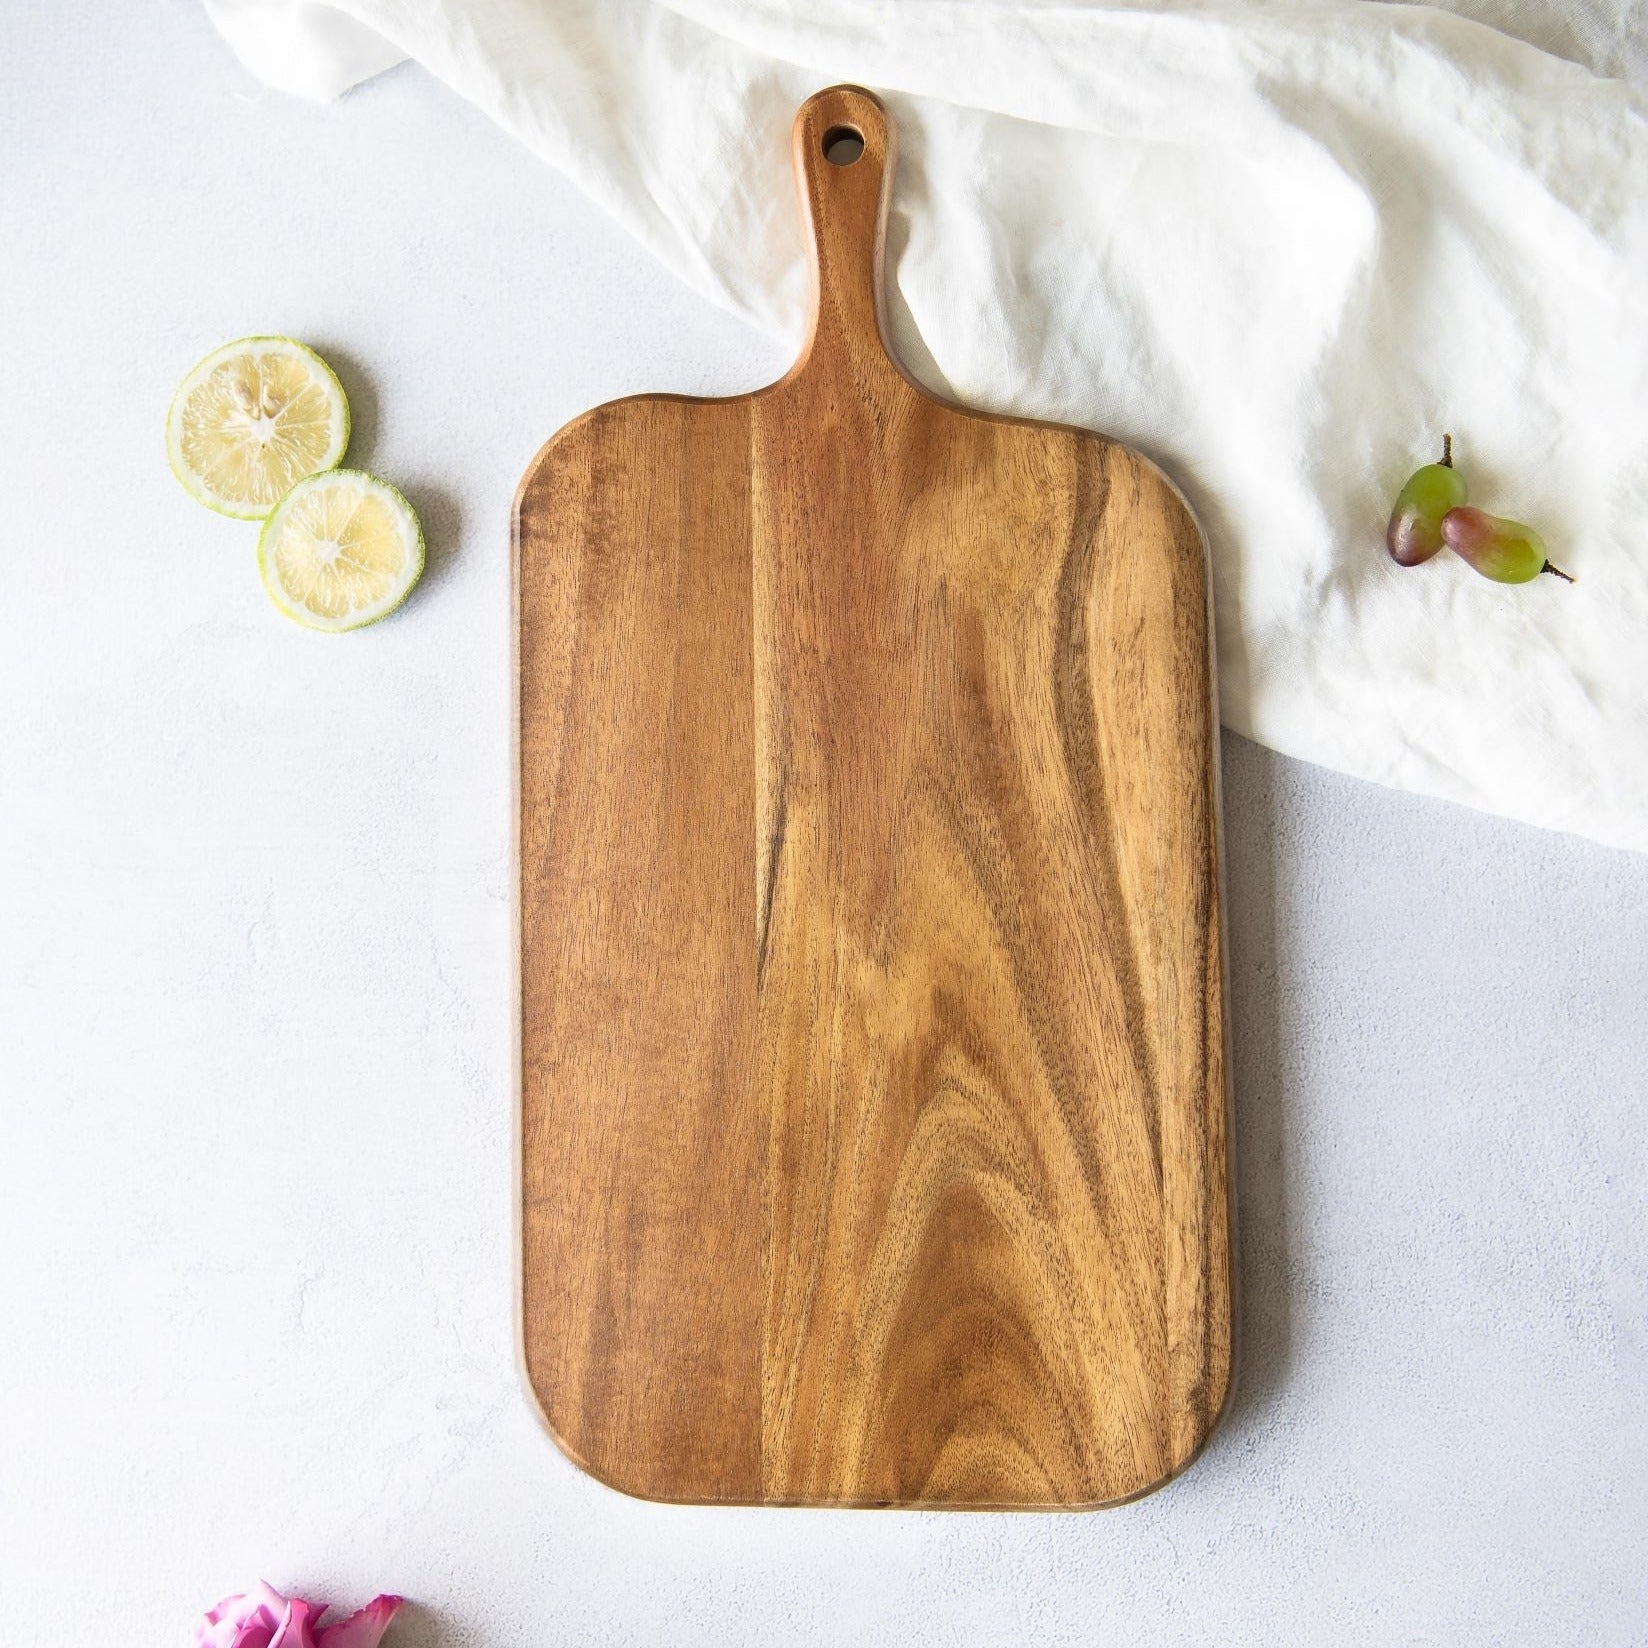 Wood Cutting Board - Wooden Kitchen Chopping Boards for Meat, Cheese,  Bread, Vegetables &Fruits,Knife Friendly Kitchen Butcher Block 